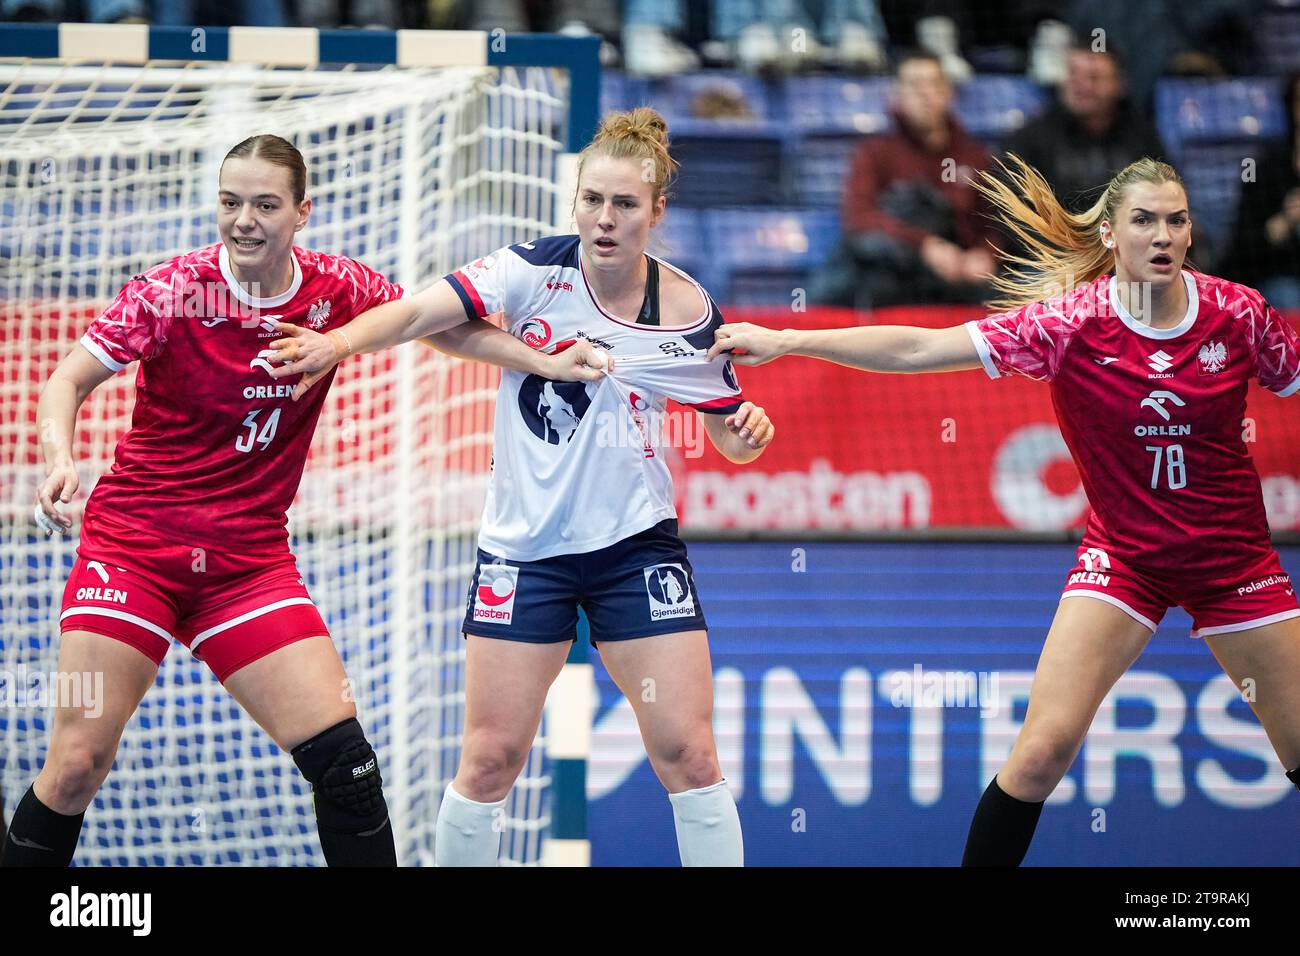 Lillehammer 20231126.Poland's Marlena Urbanska, Norway's Vilde Mortensen Ingstad and Poland's Paulina Uscinowicz during the international match between Norway and Poland in Haakons Hall, before the woman's handball World Championship in Norway, Sweden and Denmark. Photo: Beate Oma Dahle / NTB Stock Photo